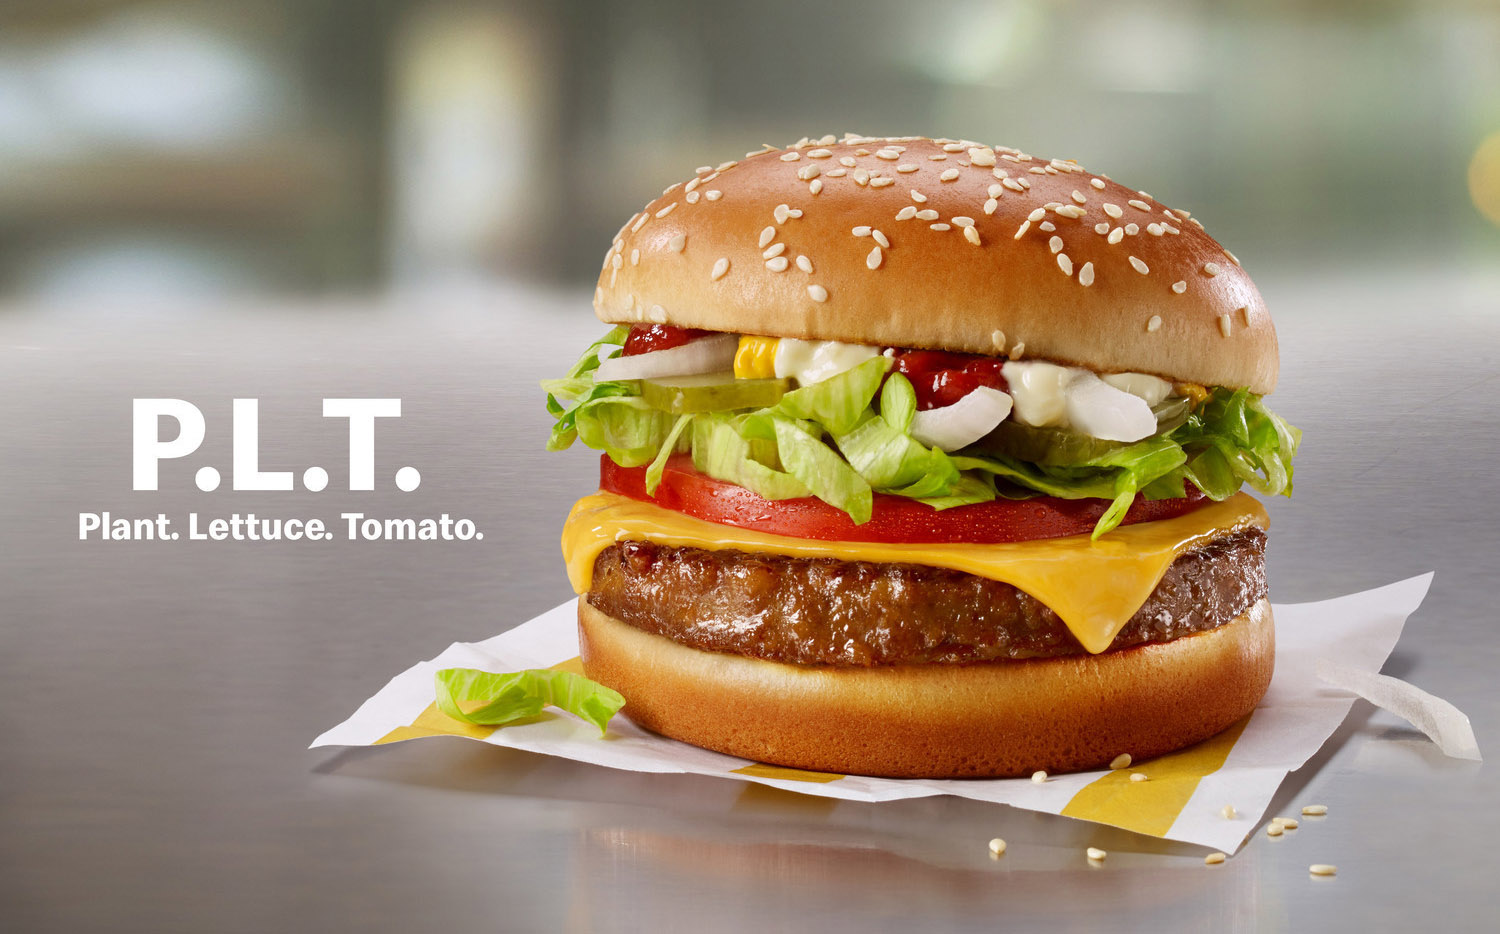 McDonald’s tests plant-based burger in partnership with Beyond Meat